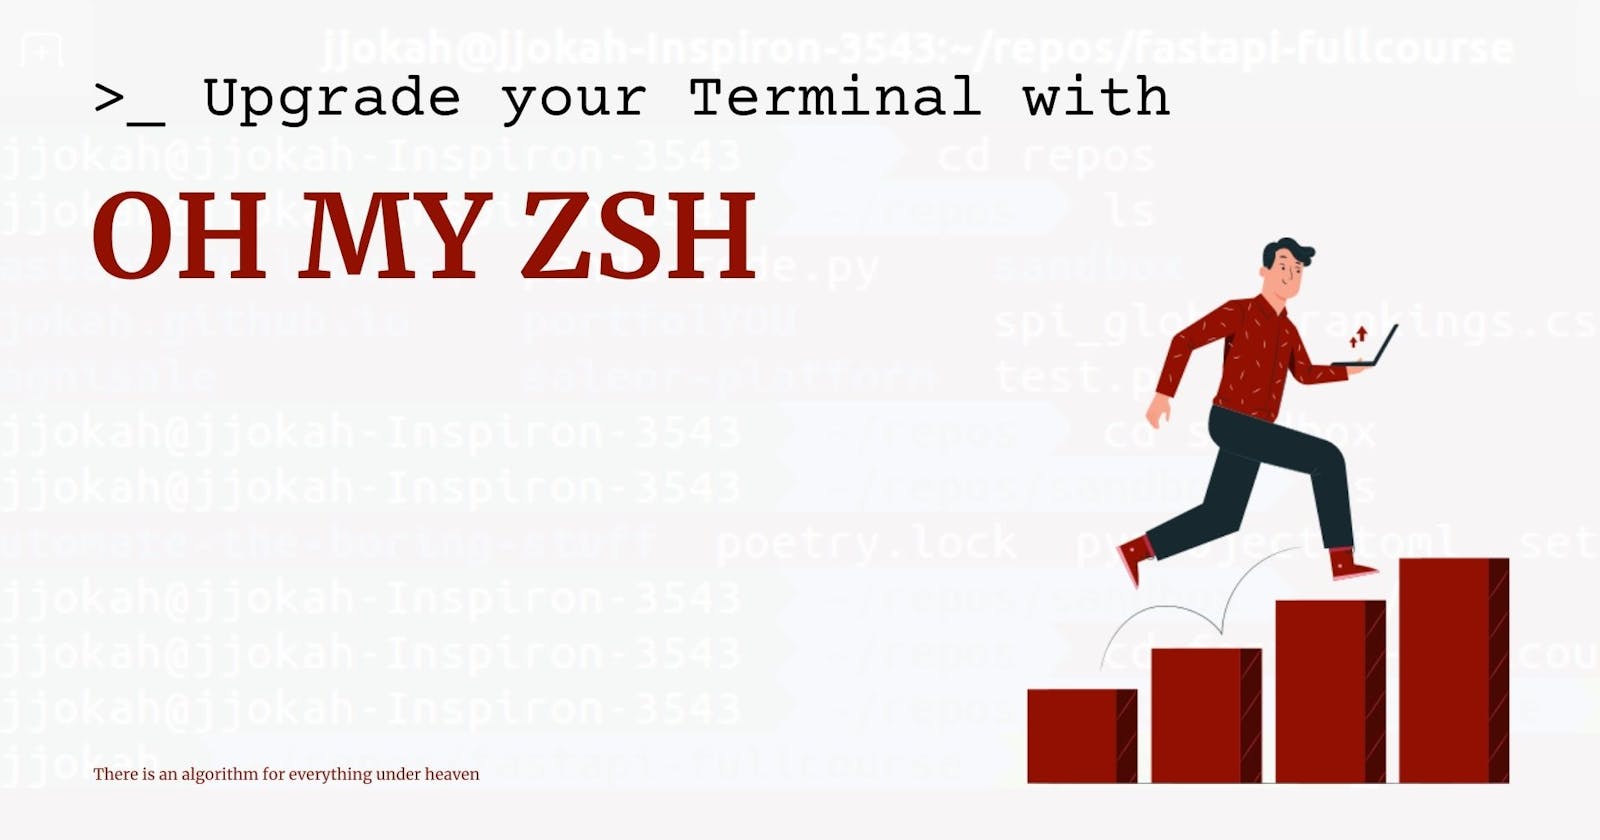 Upgrade your Terminal with OH MY ZSH